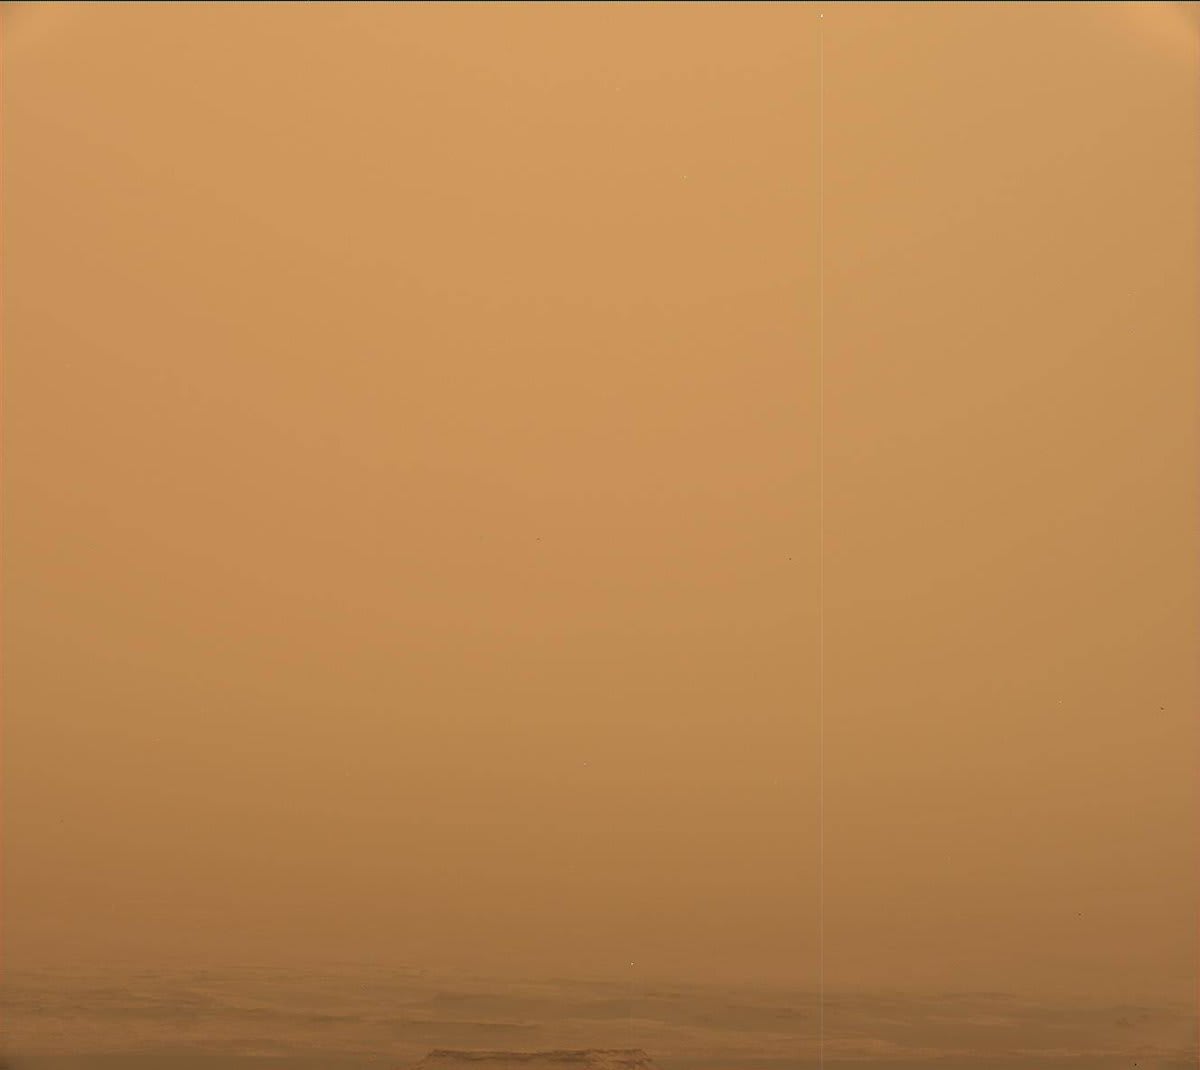 You’re a survivor, you’re not gonna give up. Hang in there, Oppy! Here’s how the @MarsRovers team will try to reach her now that this dust storm is starting to calm down: